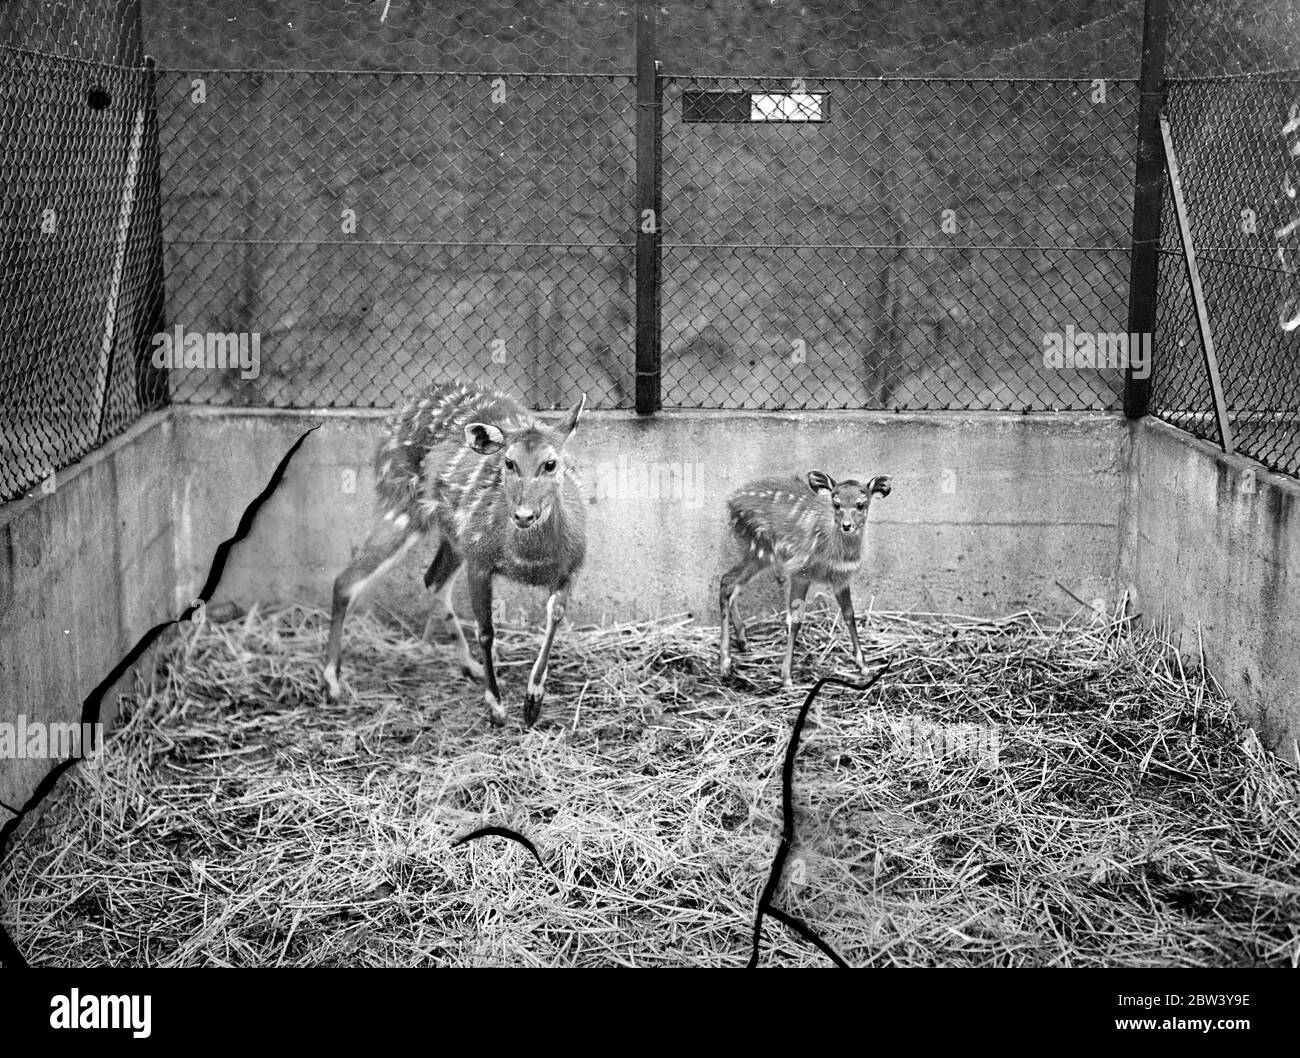 Zoo's new baby is only one of its kind. A new baby, the only one of its kind ever known, has been born at the London Zoo. It is a cross between an East African Marsh Buck and the West African Marsh Buck, and is extremely timid. Photo shows: The Zoo's new baby with its mother in the enclosure at the London Zoo. 6 March 1937 Stock Photo